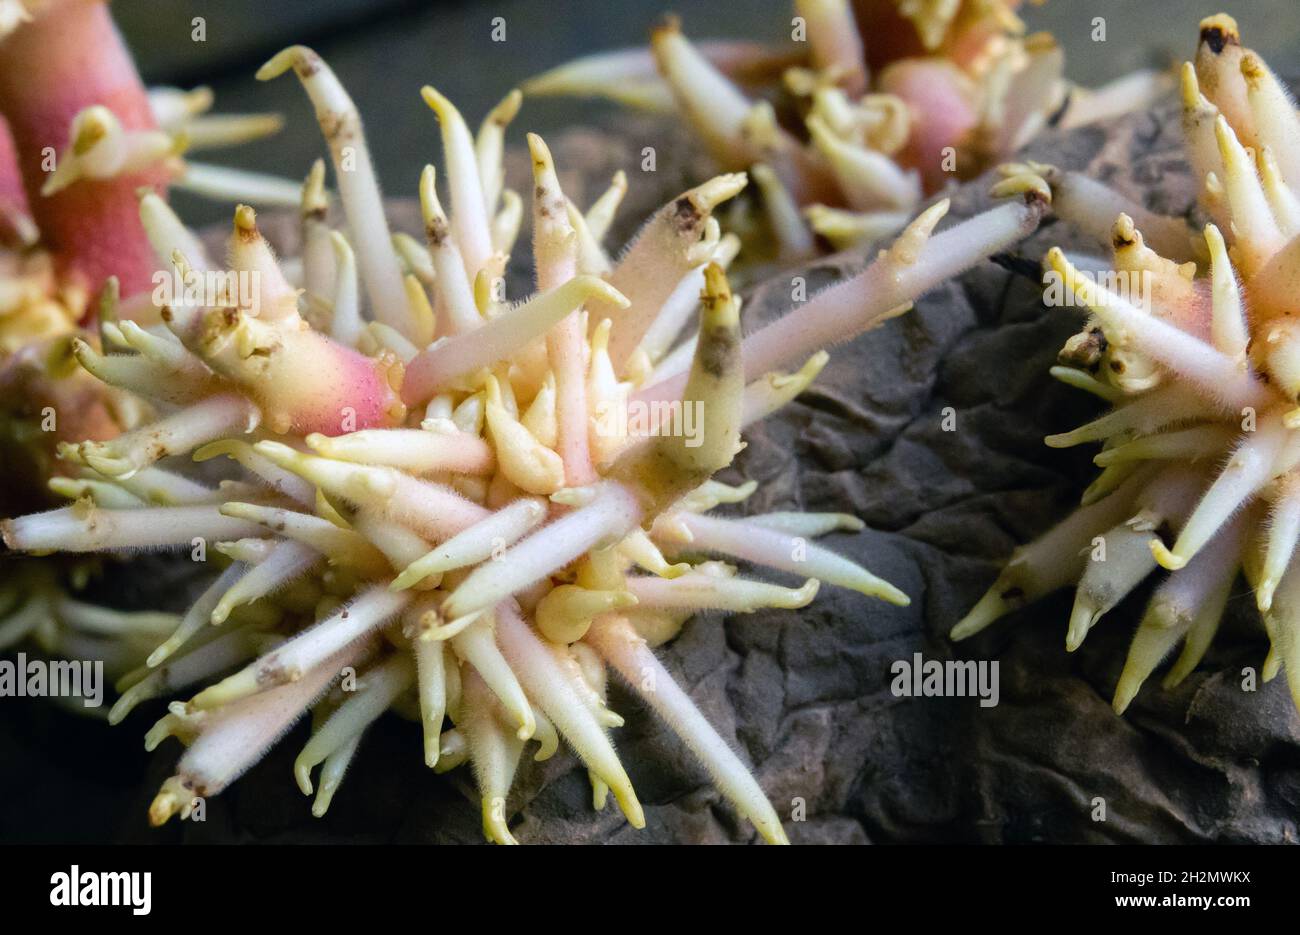 Shriveled sprouted potatoes with lush bunches of young roots close up Stock Photo